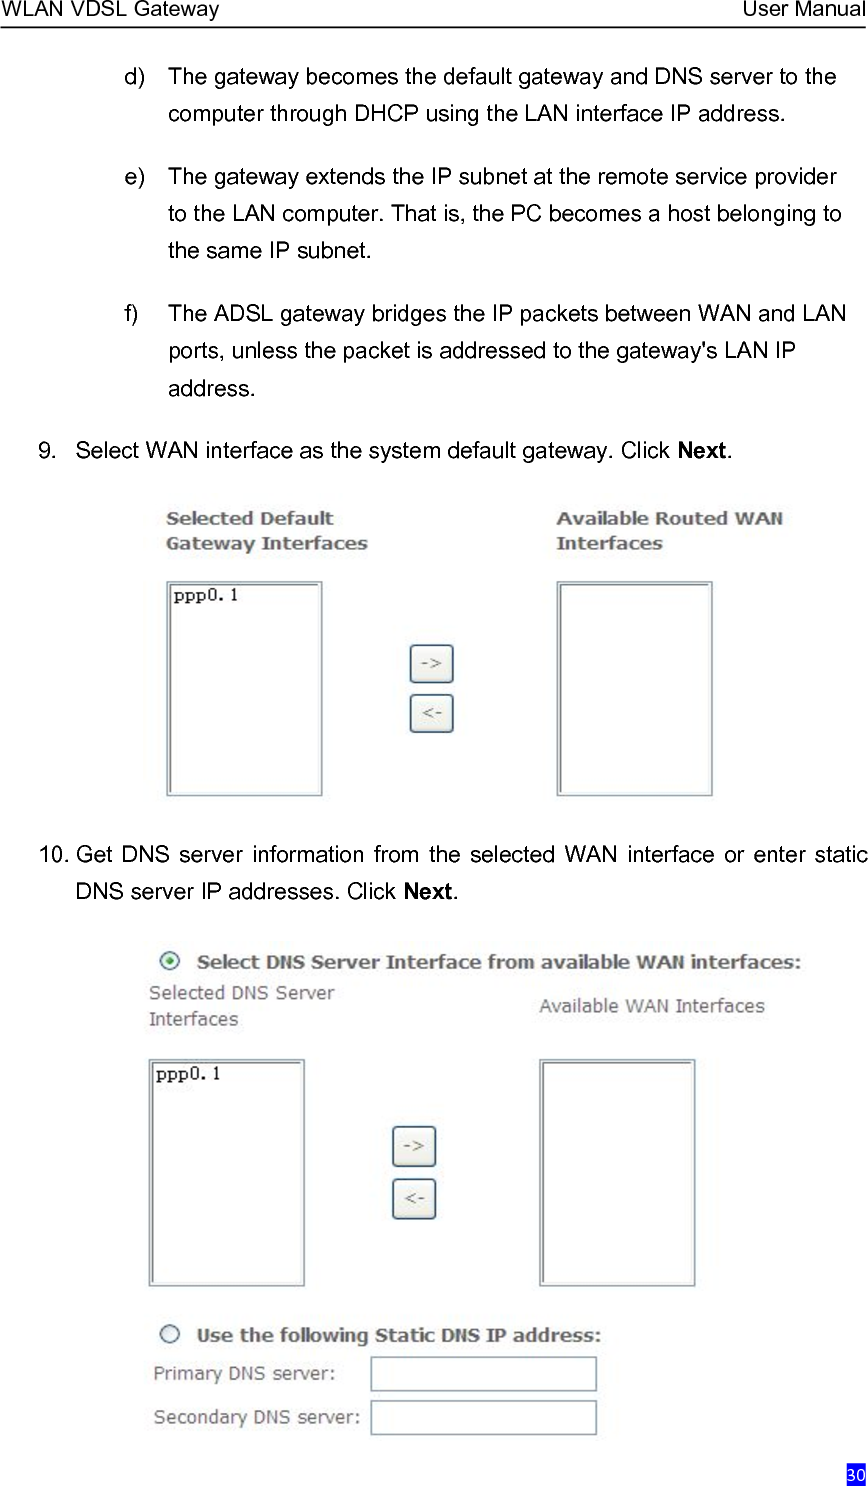 WLAN VDSL Gateway User Manual30d) The gateway becomes the default gateway and DNS server to thecomputer through DHCP using the LAN interface IP address.e) The gateway extends the IP subnet at the remote service providerto the LAN computer. That is, the PC becomes a host belonging tothe same IP subnet.f) The ADSL gateway bridges the IP packets between WAN and LANports, unless the packet is addressed to the gateway&apos;s LAN IPaddress.9. Select WAN interface as the system default gateway. Click Next.10. Get DNS server information from the selected WAN interface or enter staticDNS server IP addresses. Click Next.